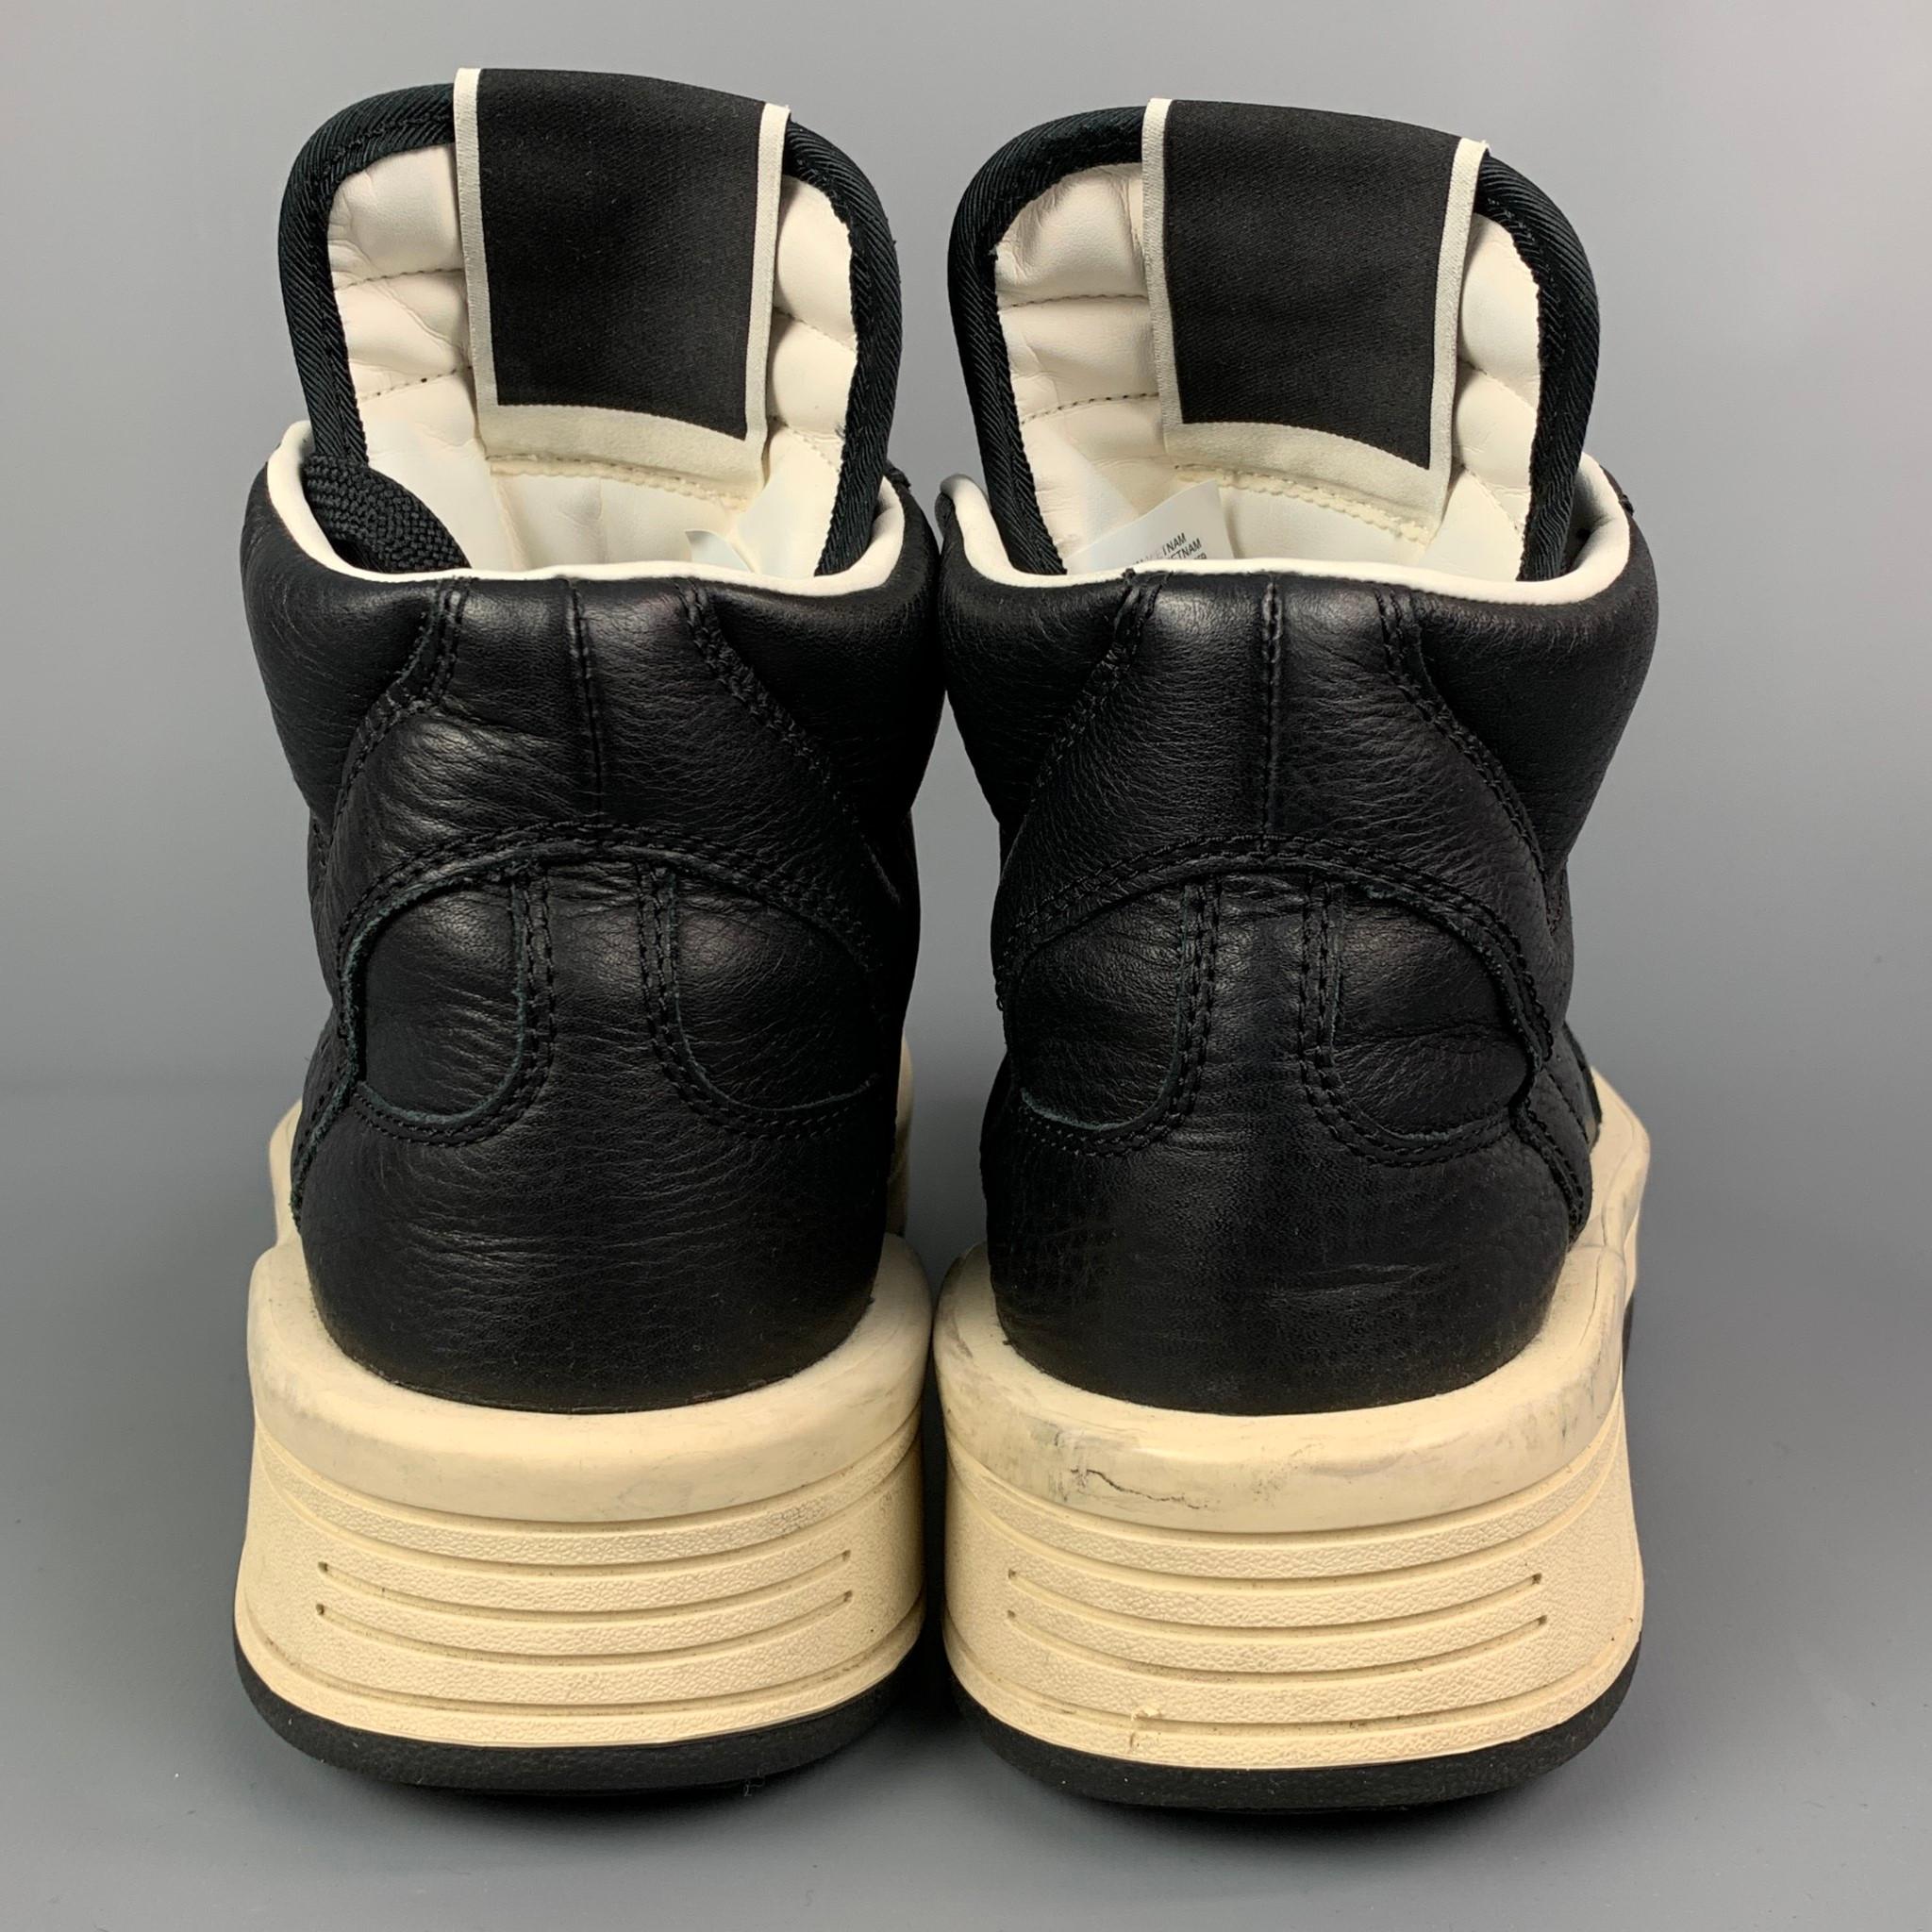 CONVERSE x DRKSHW Size 9.5 Black & Cream Leather High Top TURBOWPN Sneakers In Good Condition In San Francisco, CA